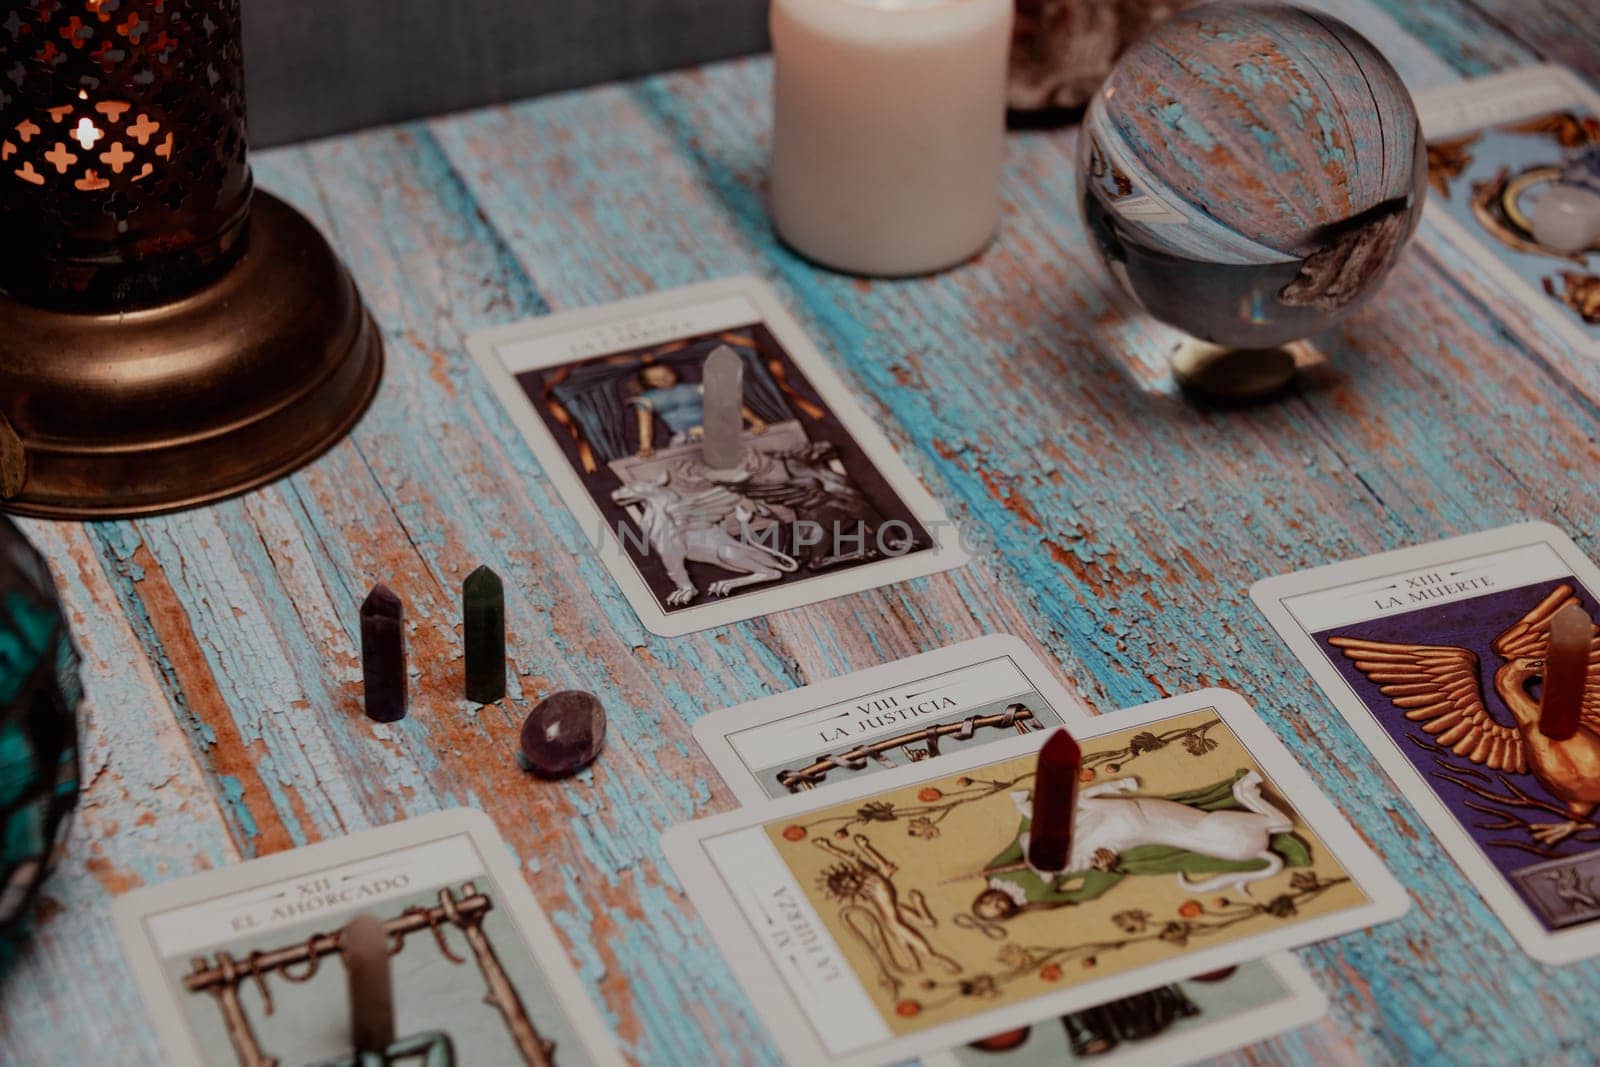 A dimly lit scene showing a spread of tarot cards, alongside crystals, candles, and a crystal ball on a rustic wooden table